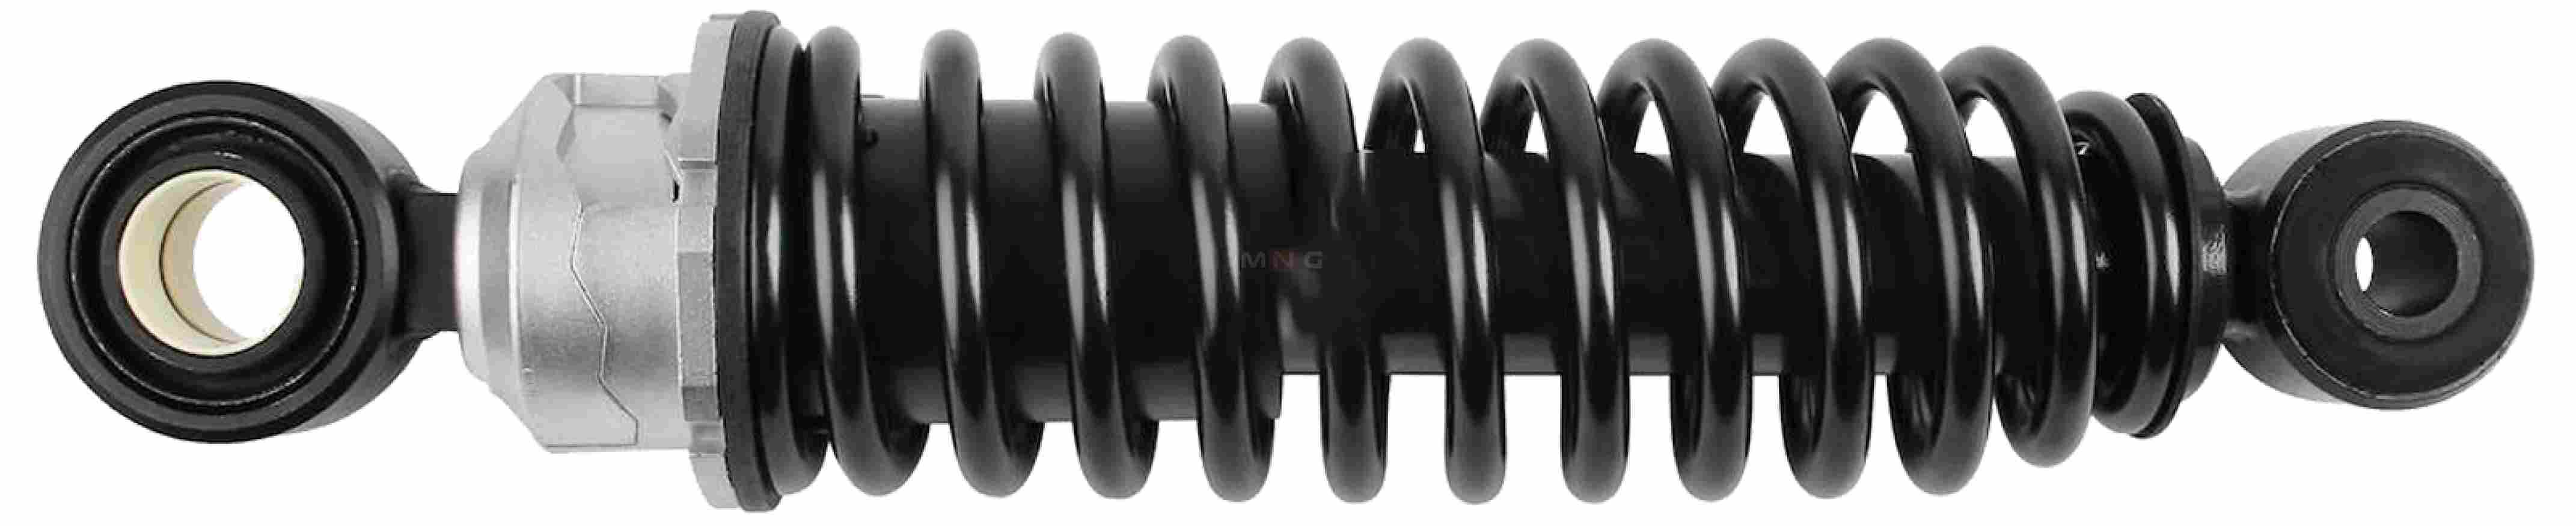 504115380-MNG-SHOCK-ABSORBER-IVECO